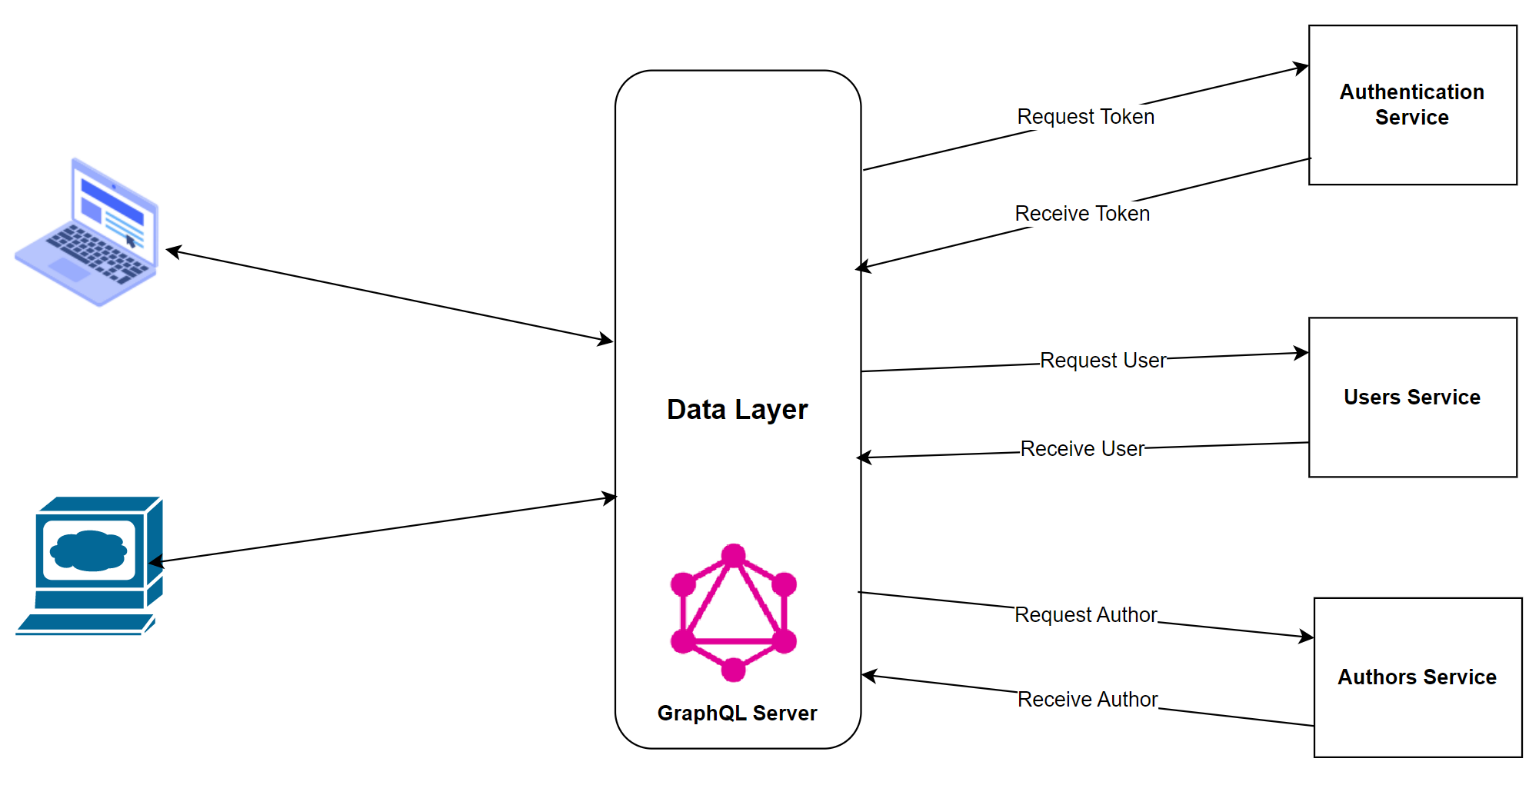 Figure       10      : Using GraphQL as a data layer, delegating calls to downstream services